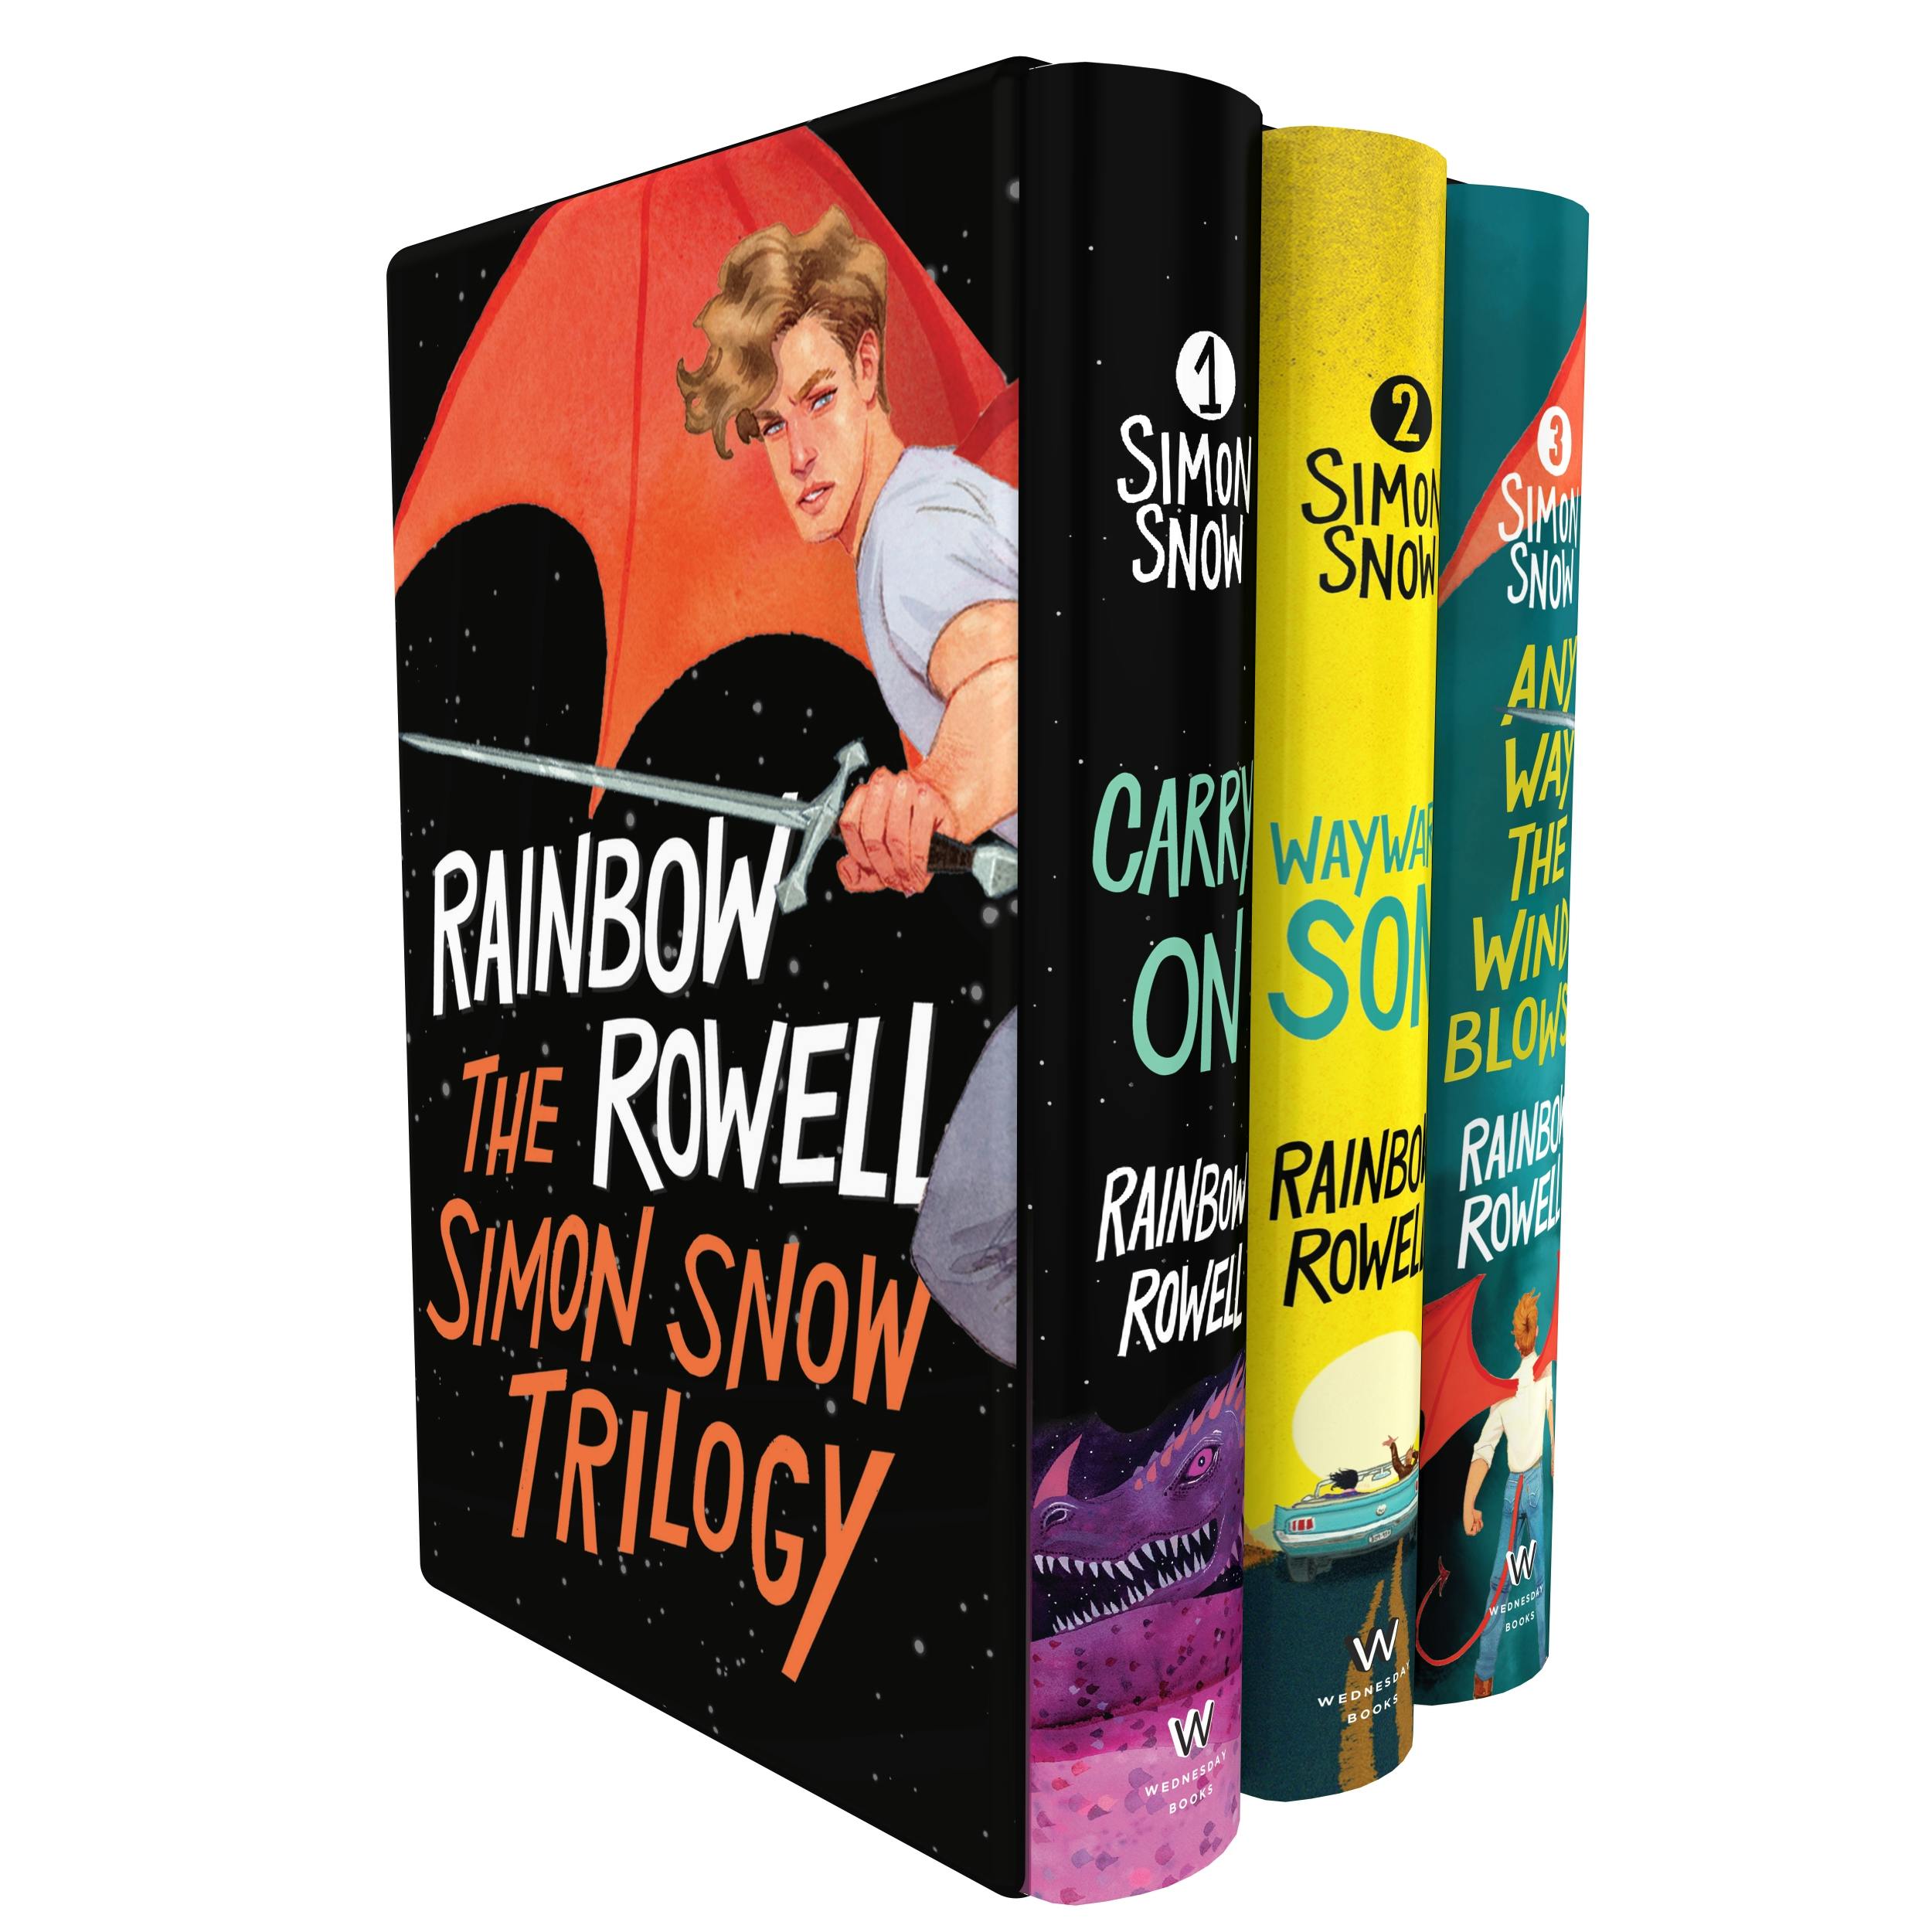 Carry on rainbow rowell synopsis - clockguide